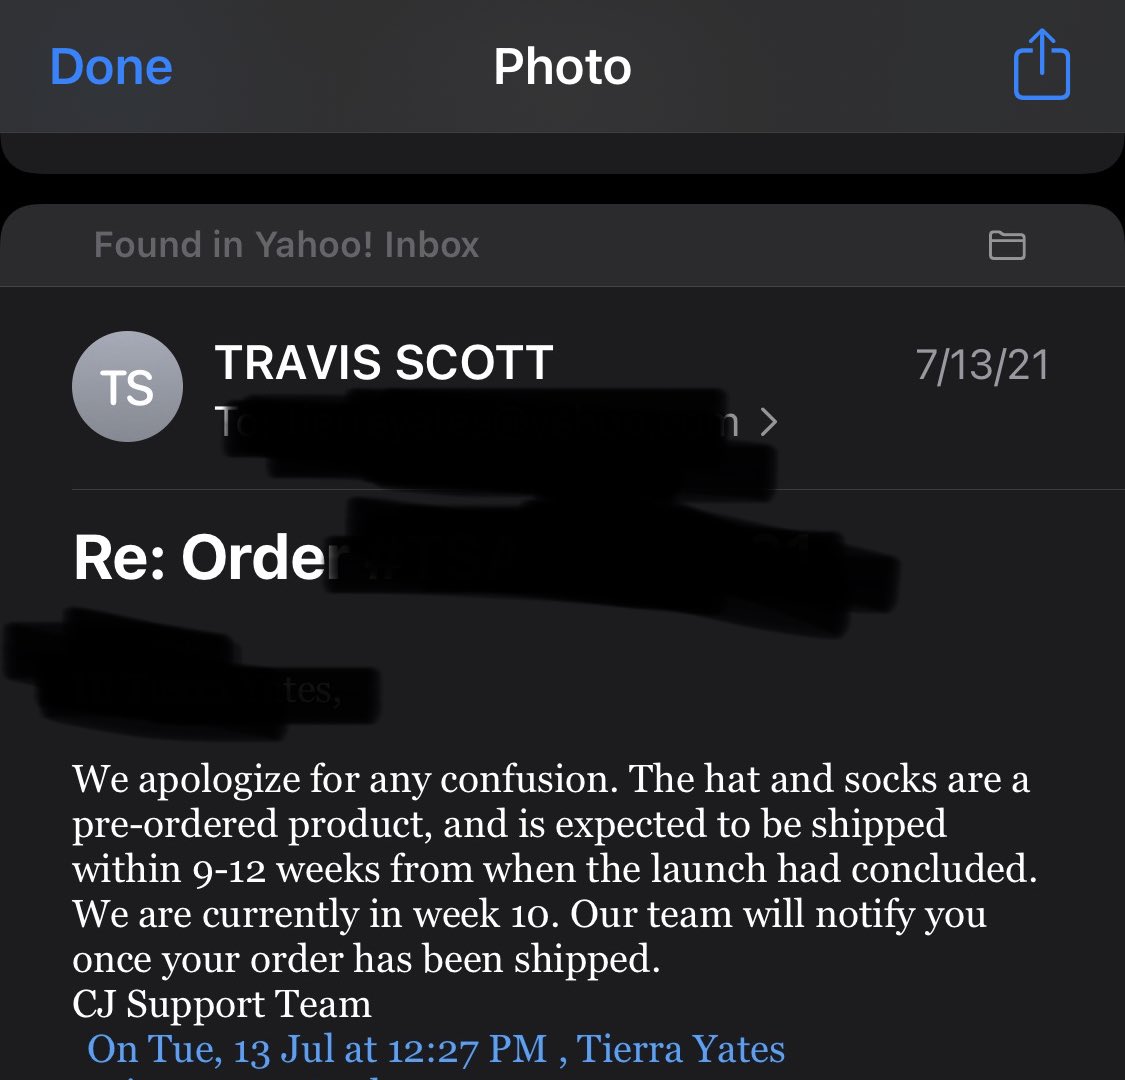 This is ridiculous just make sure i win the raffle on the shoes i wait years on yo products to ship 🥲🥲🥲 @trvisXX #travisscott1s #longestshippinginhistory #illwait 😅